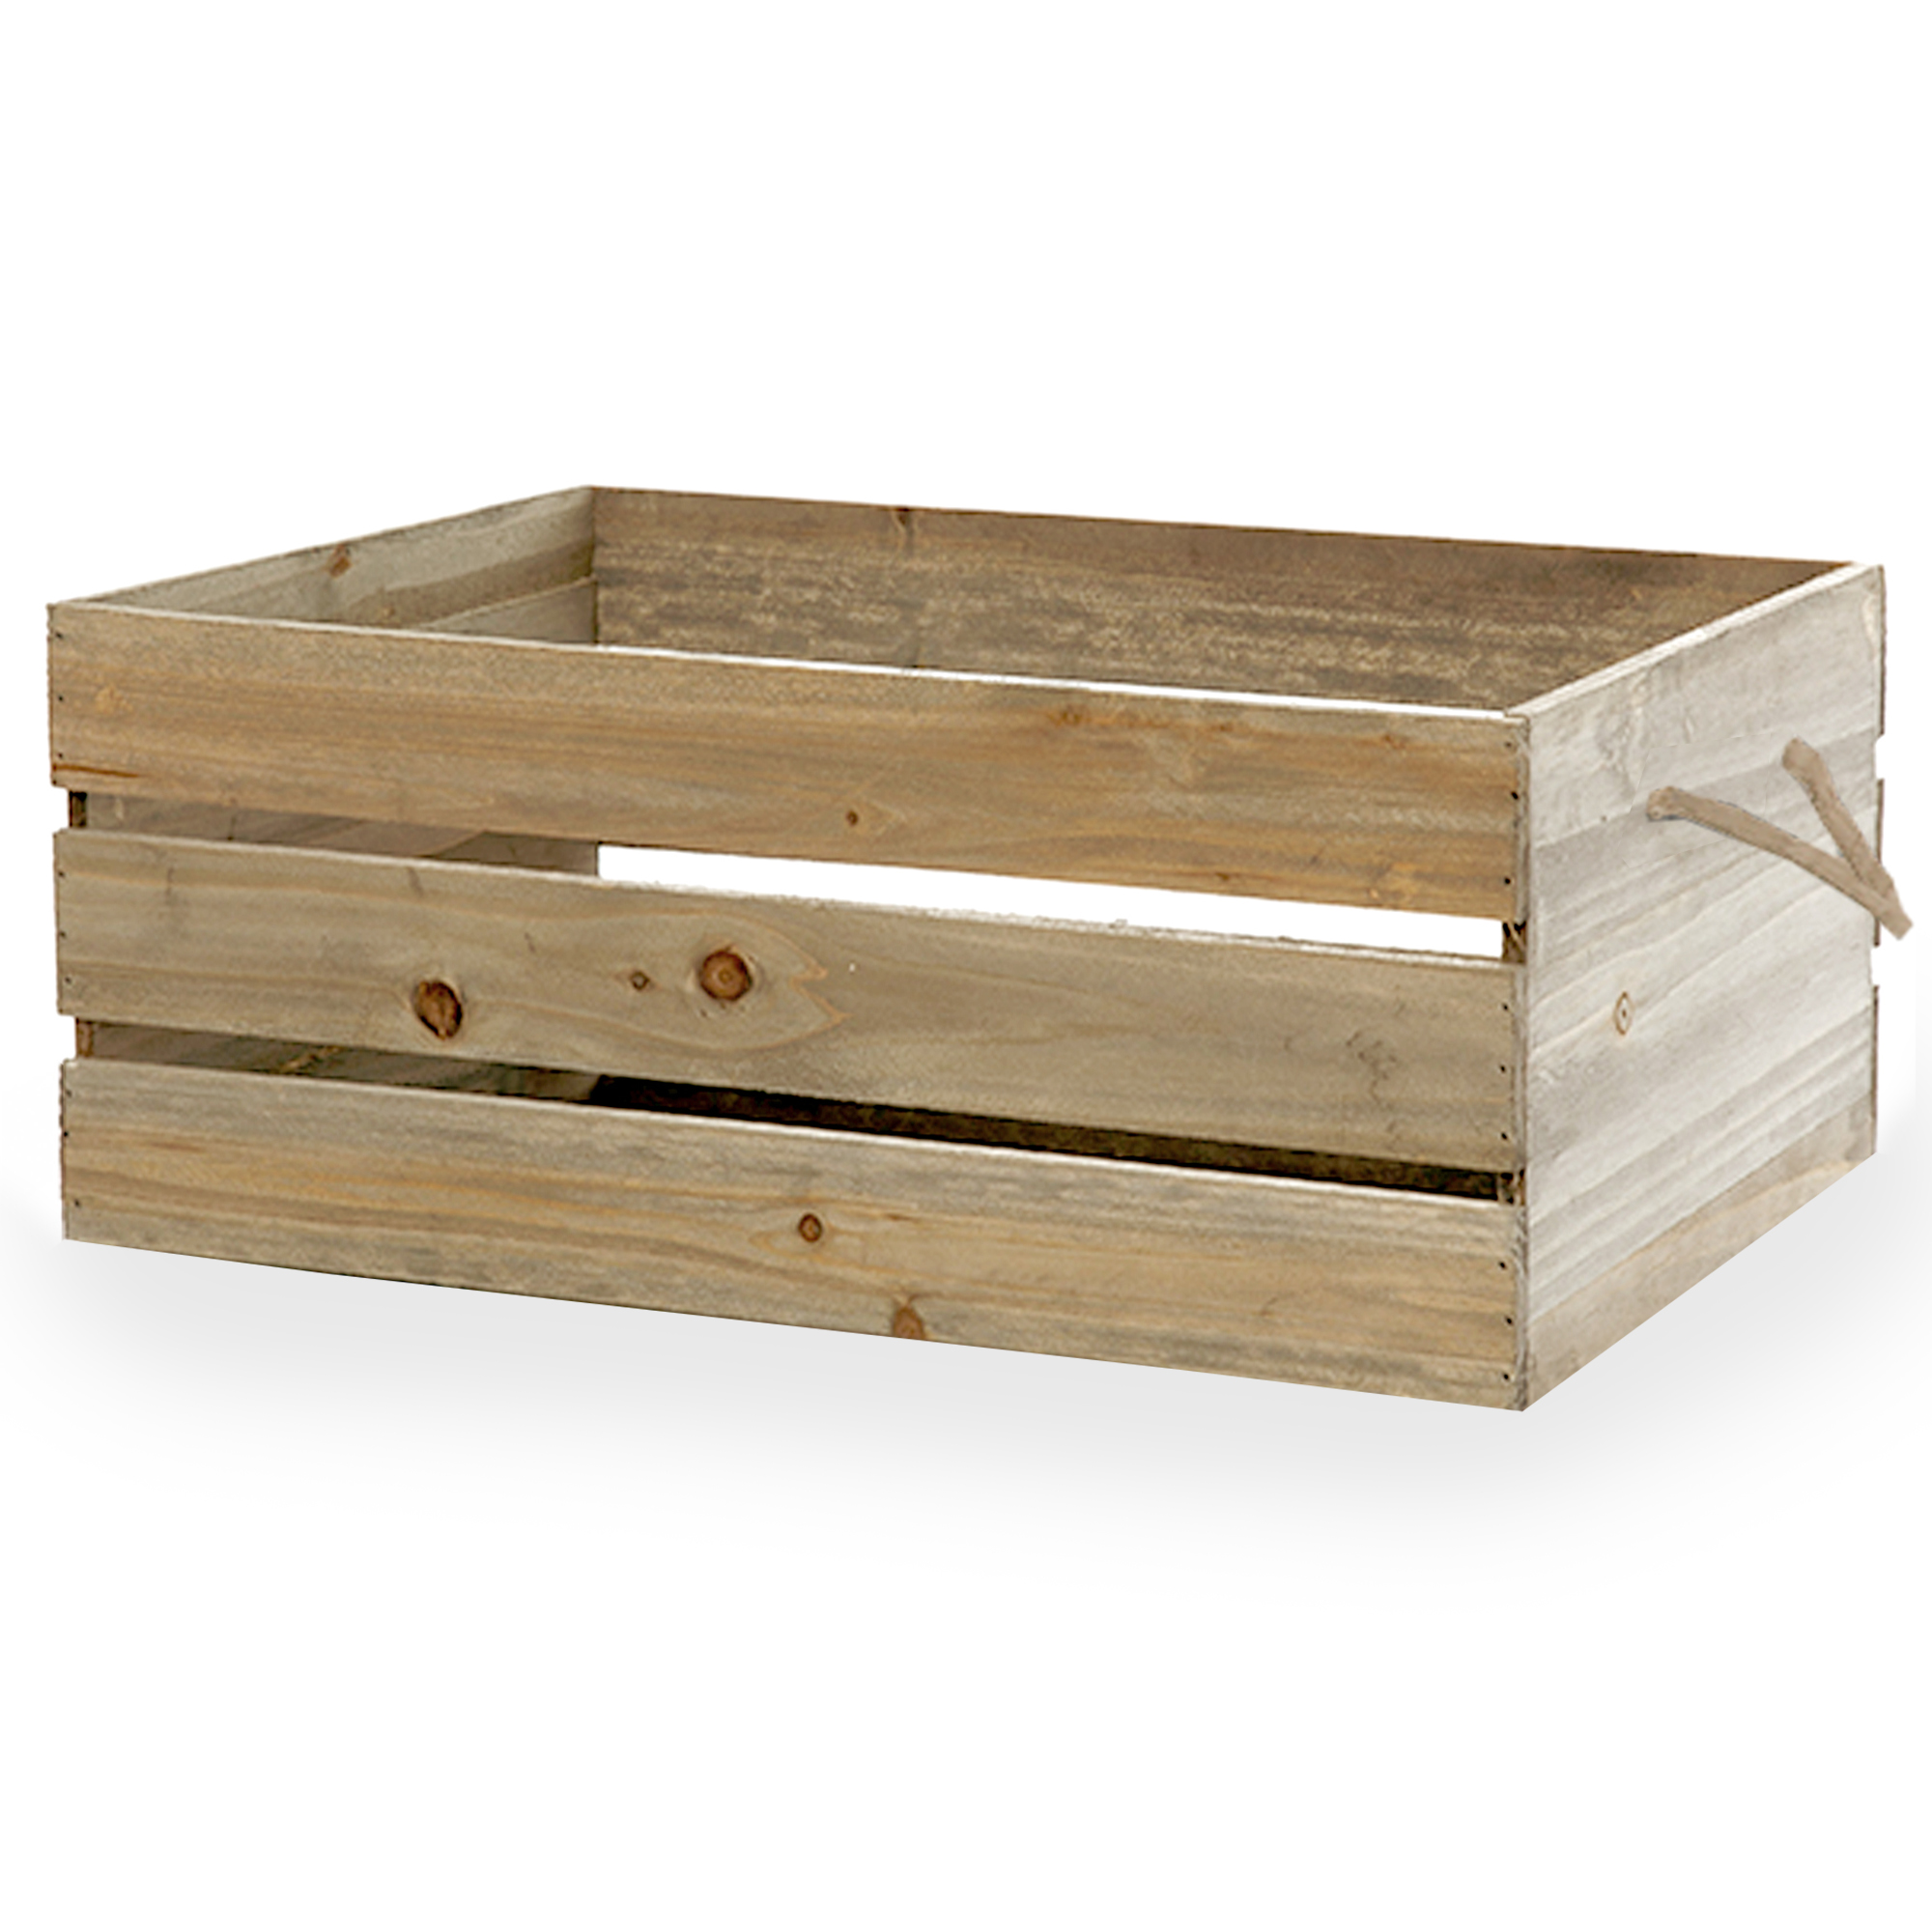 Wooden Crate Storage Box with In Handles 15in